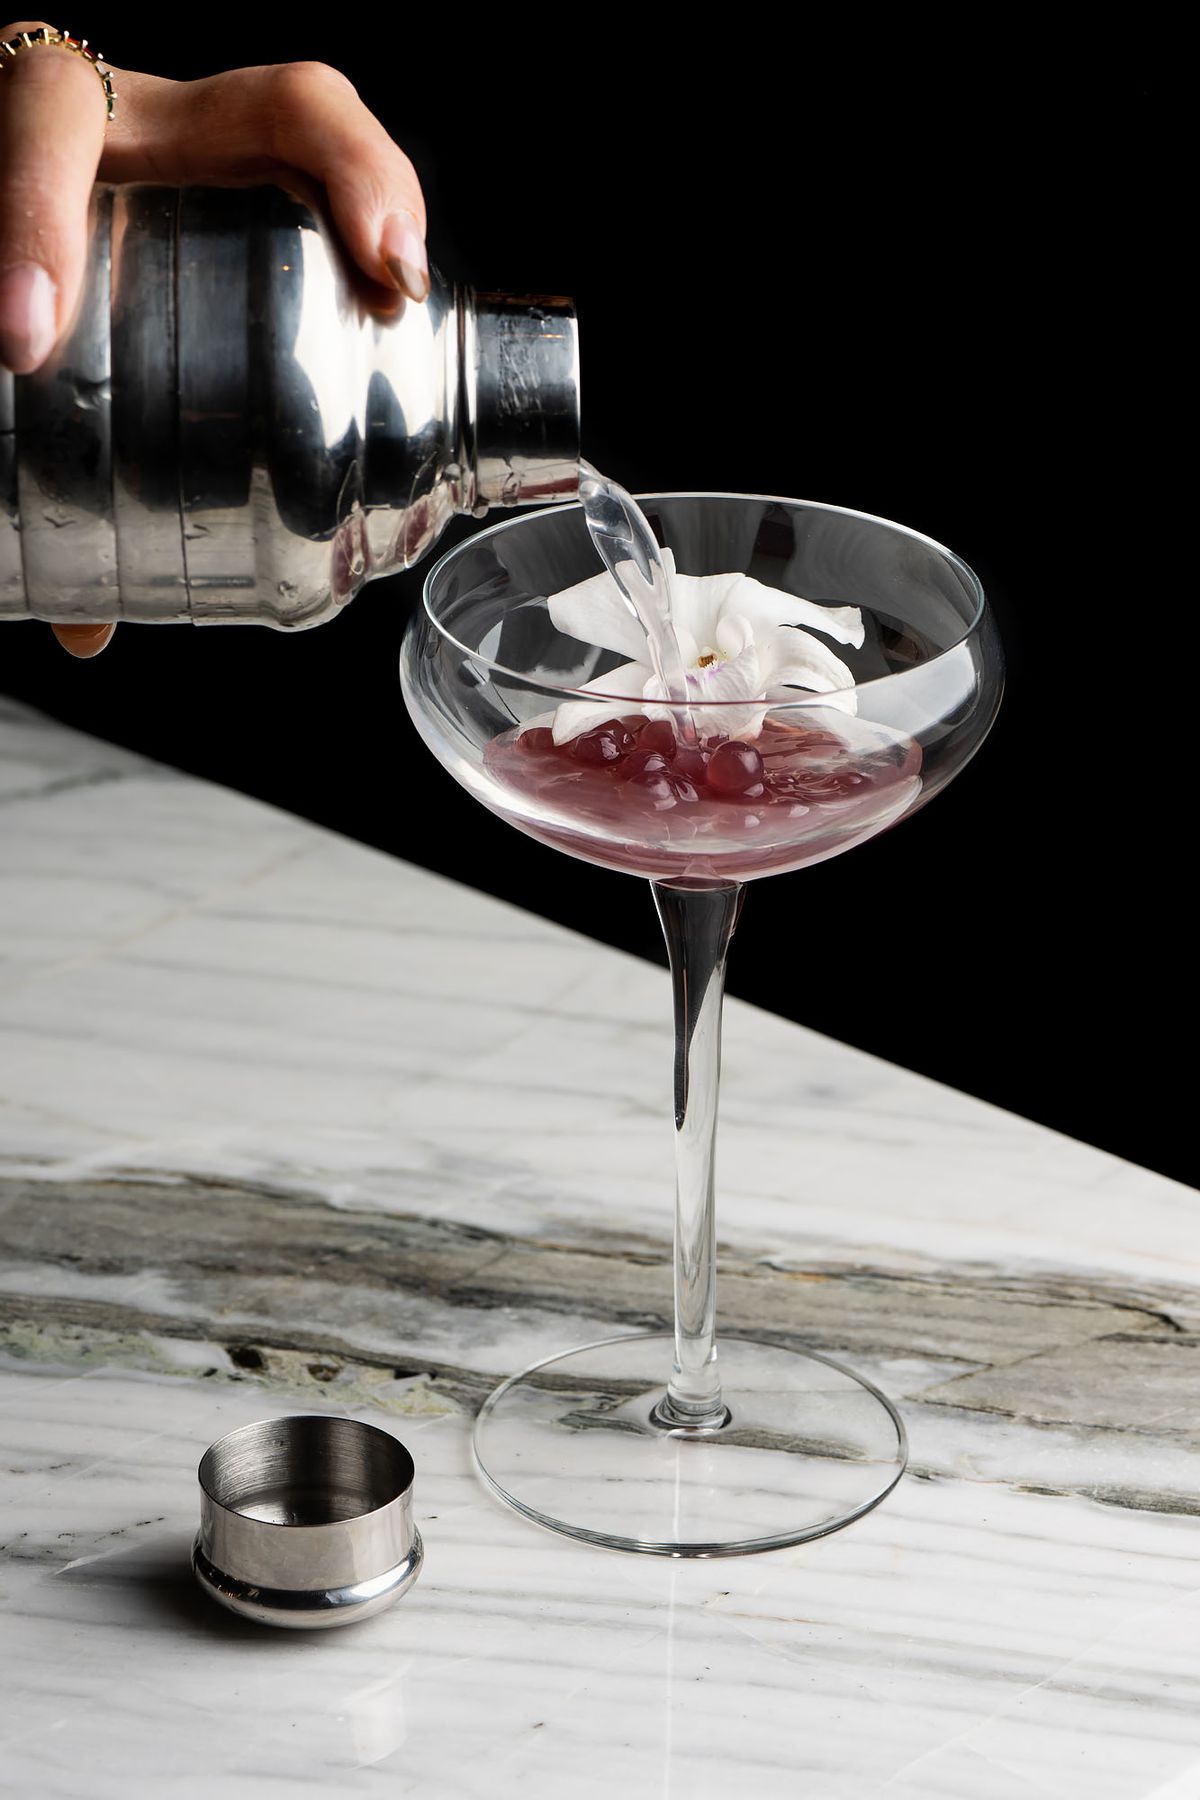 A clear liquid poured over pomegranate in a glass cocktail piece.